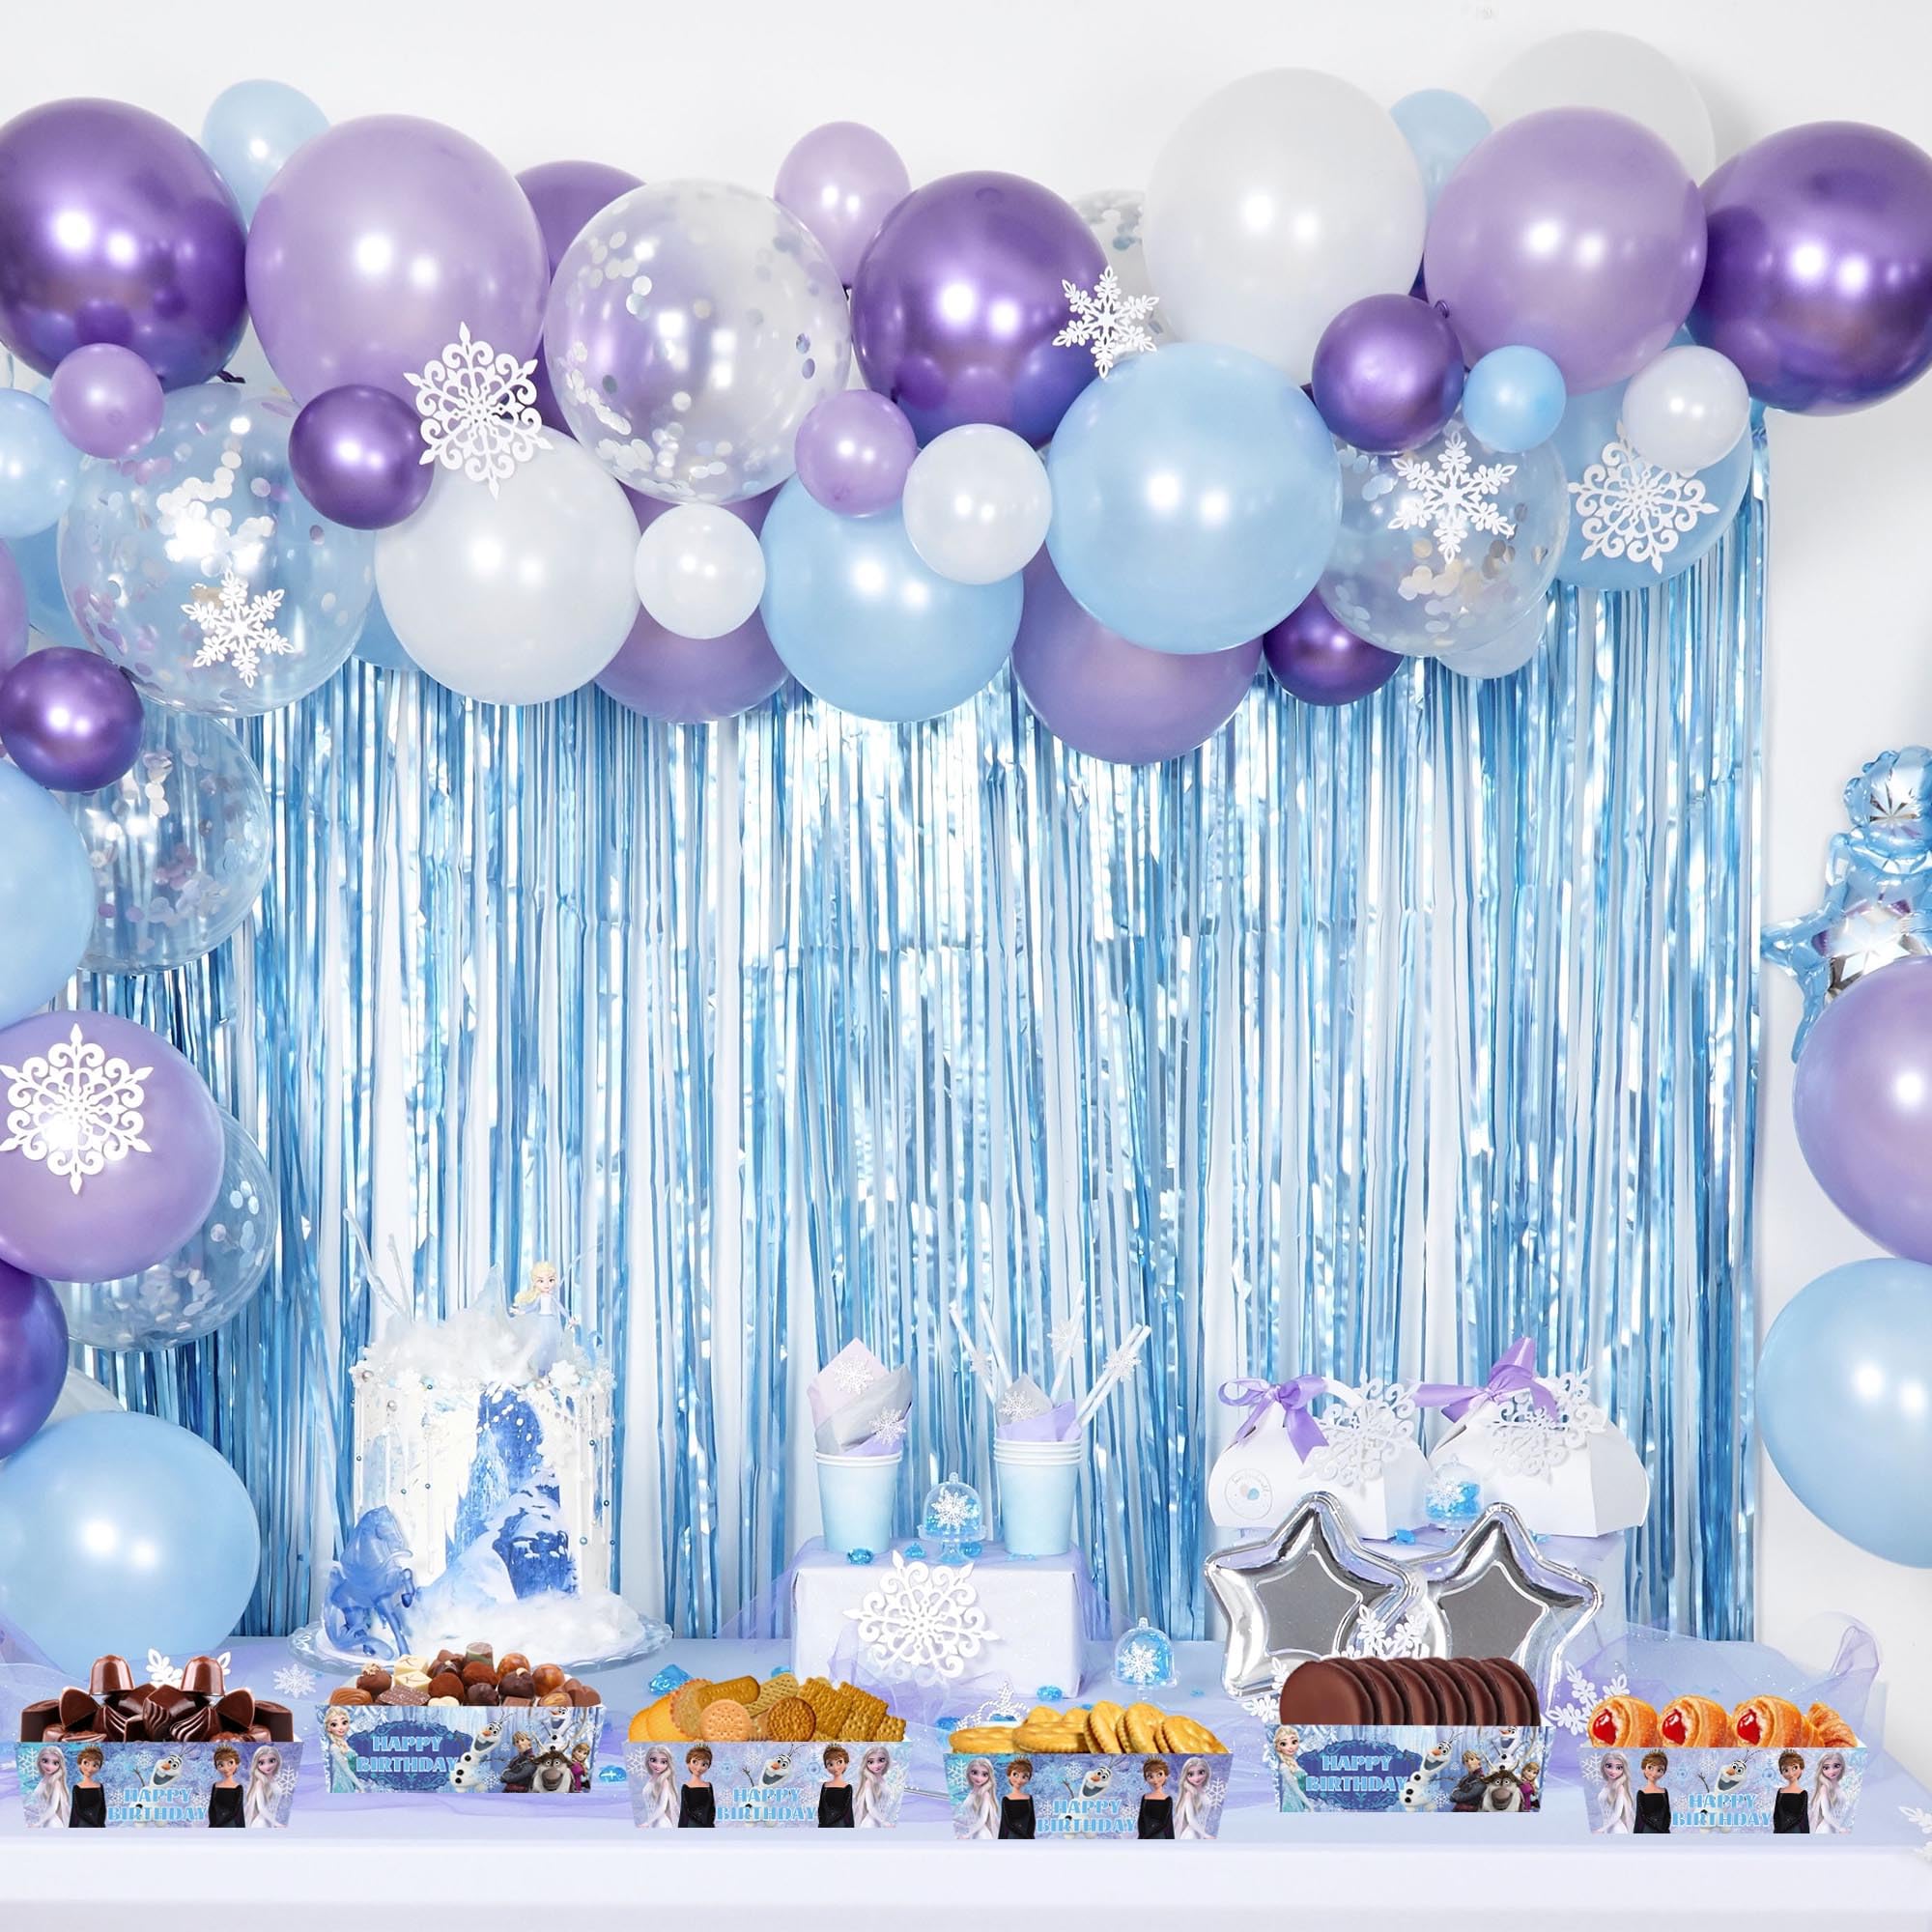 Get the Party Started with Personalized Party Supplies at Pa - Tamil Nadu - Chennai ID1554650